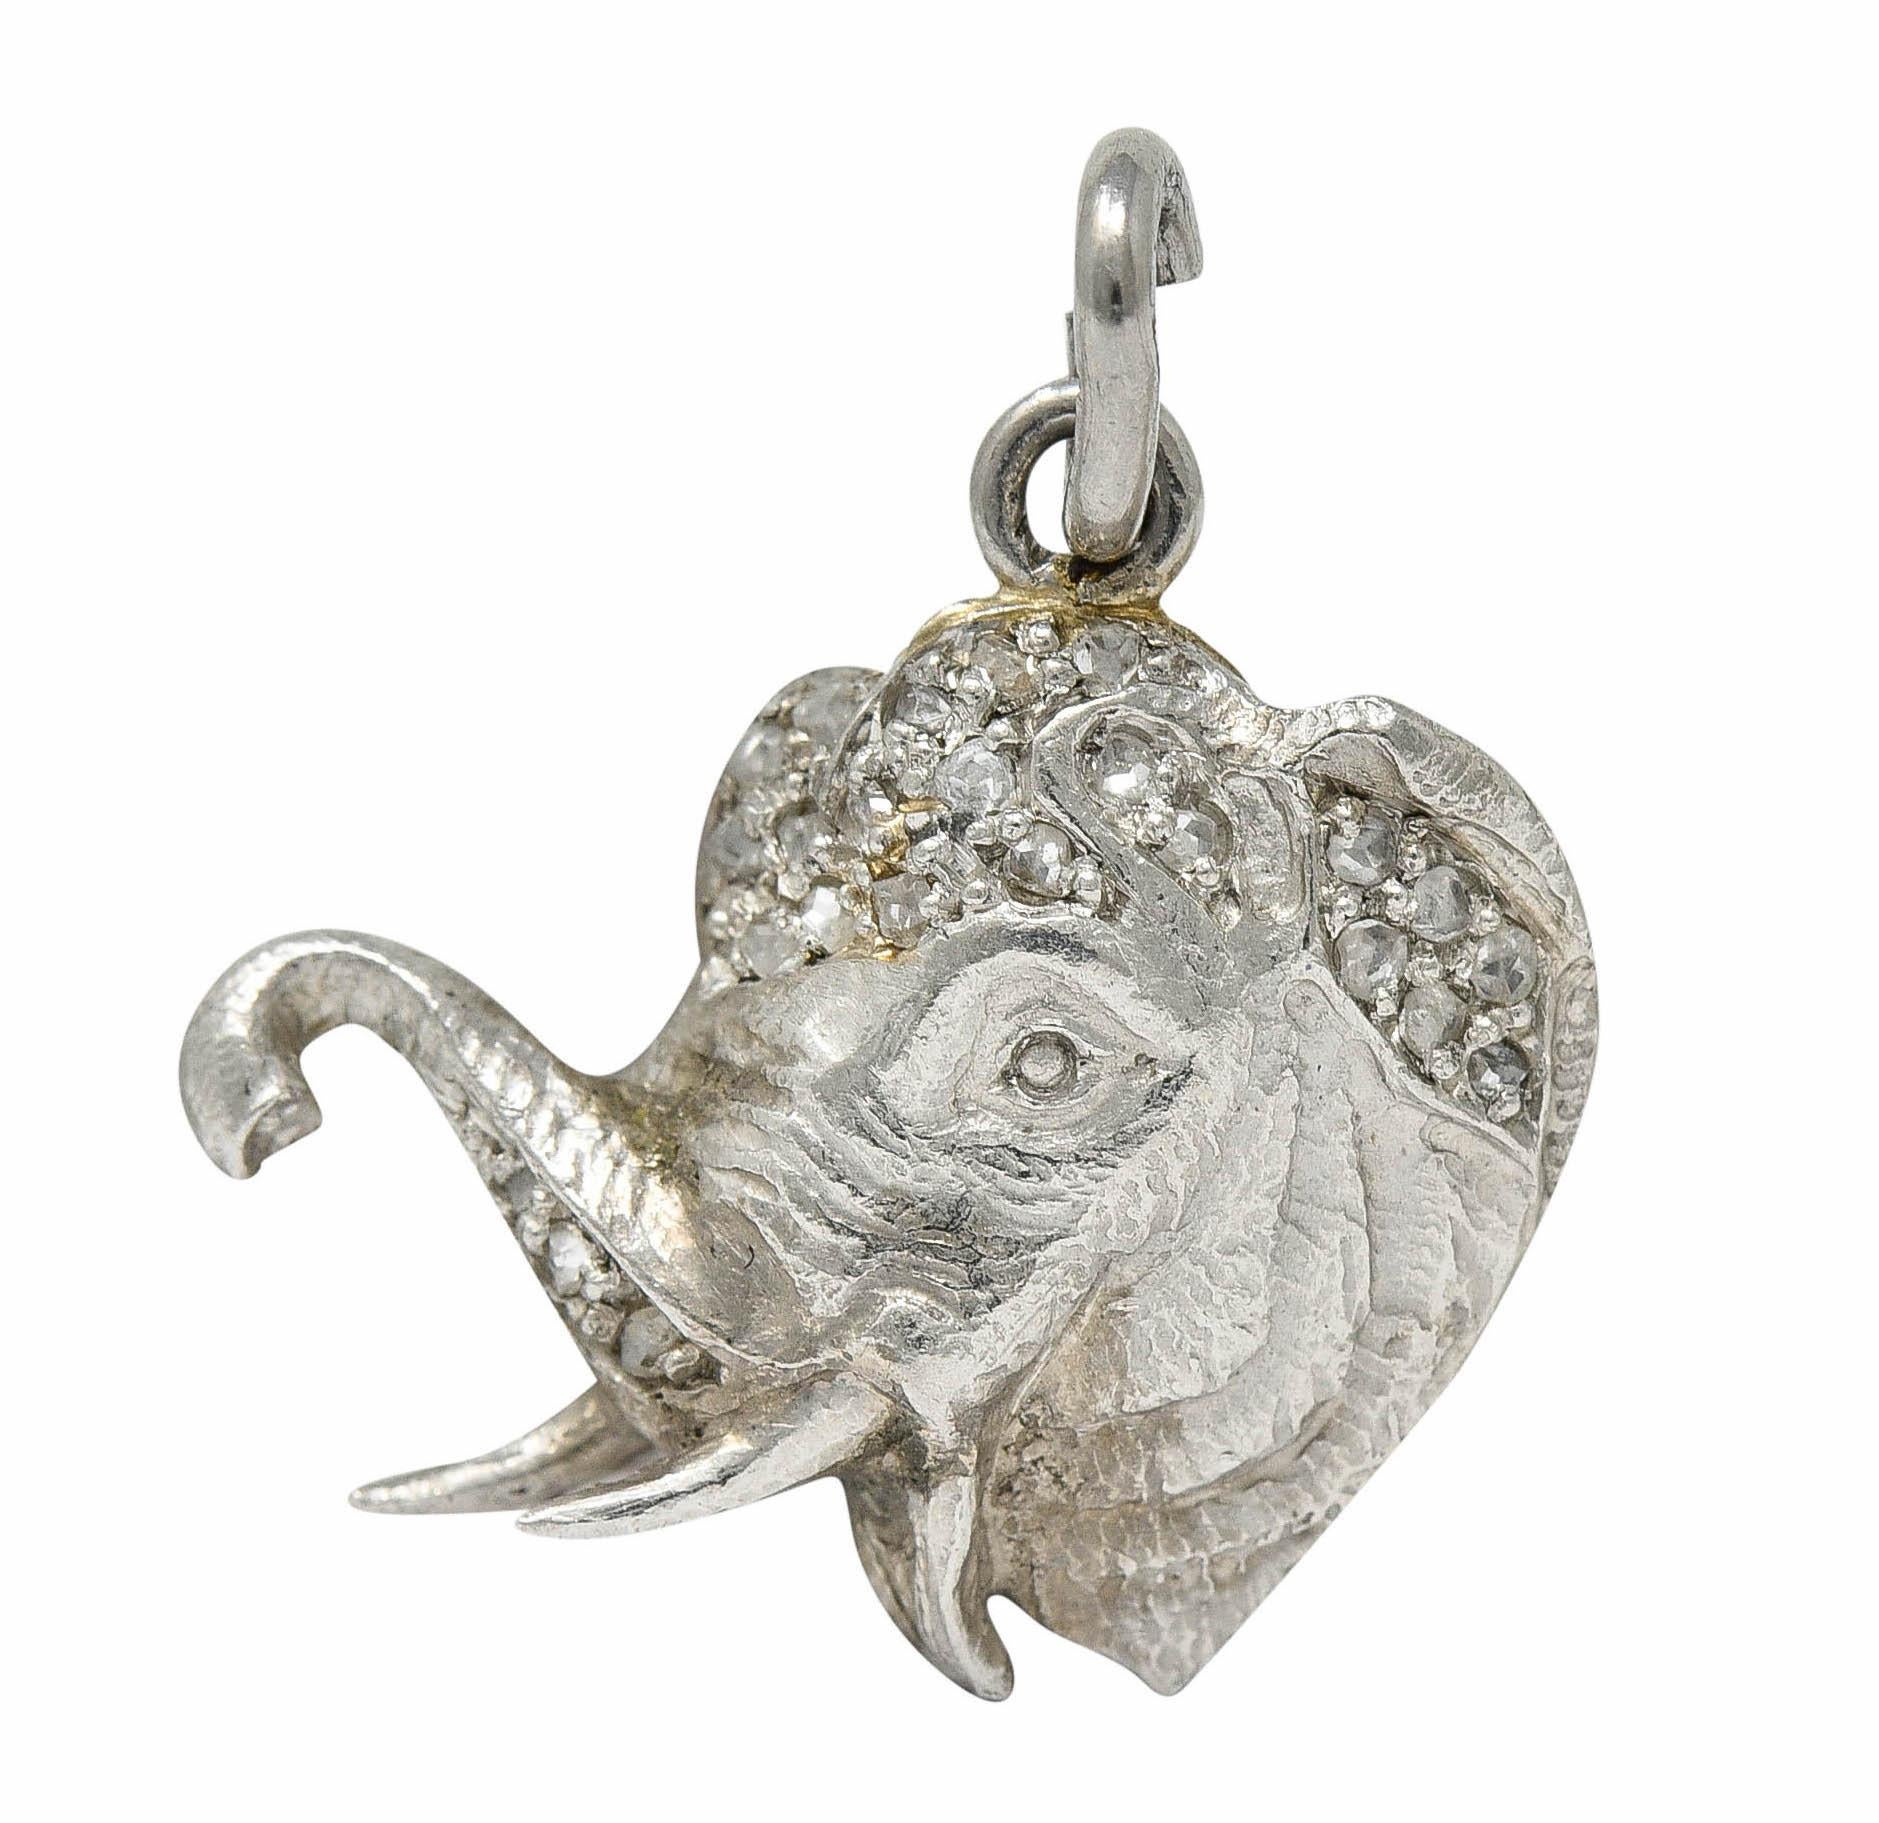 Charm is designed as a highly rendered elephant bust

With tusks, realistically wrinkled skin, and an upturned trunk

Crown is accented by rose cut diamonds weighing approximately 0.30 carat

With maker's mark and tested as platinum

Circa: